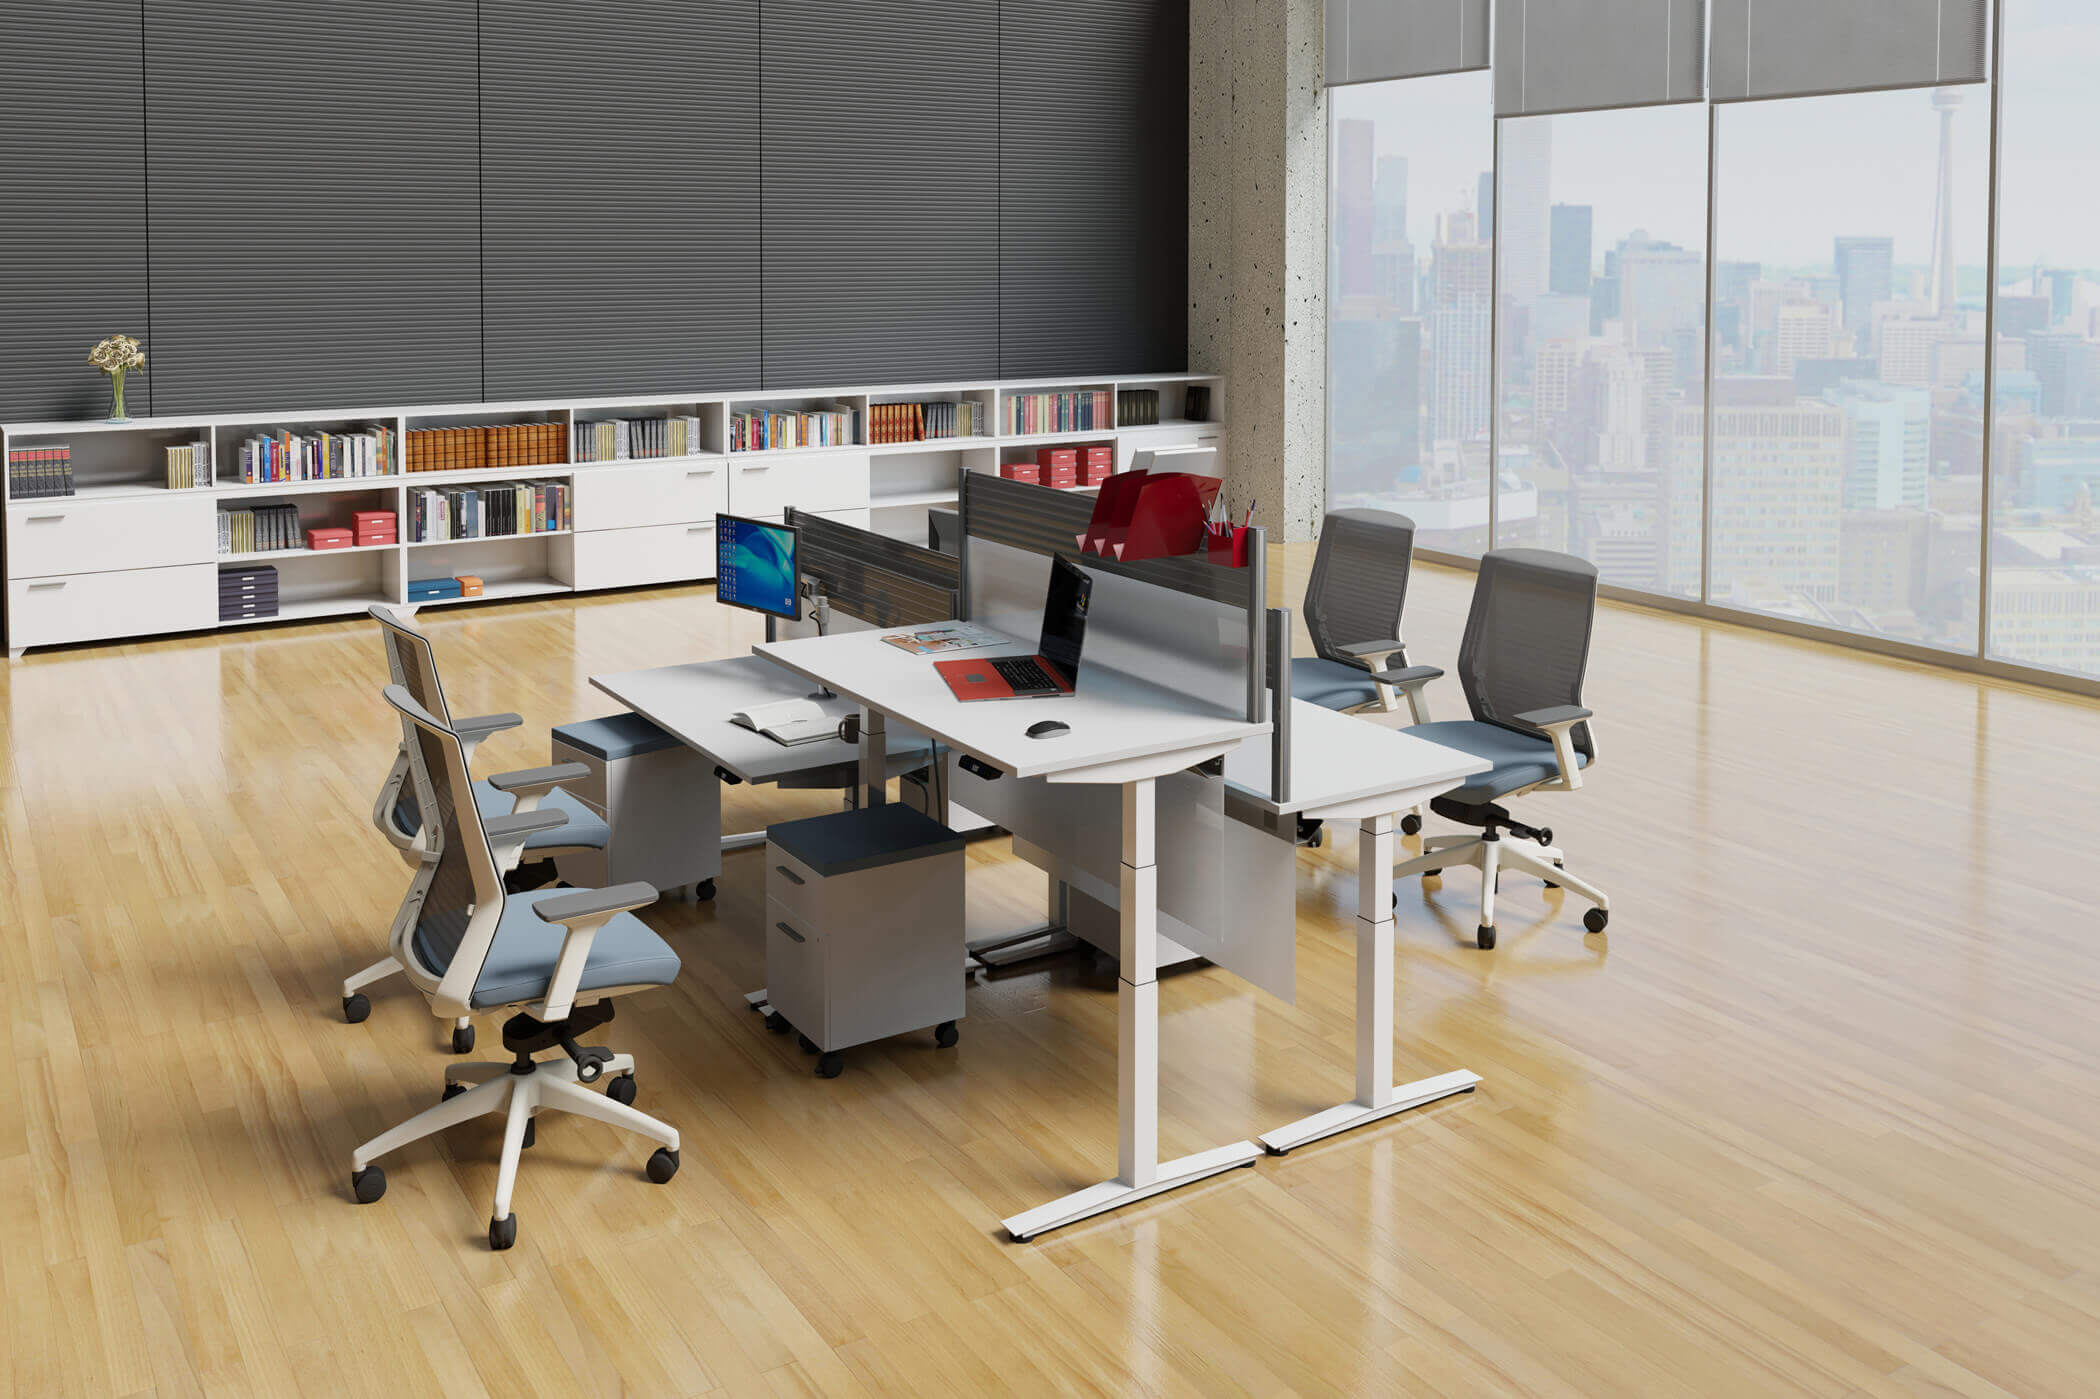 Office furniture supply and installation | The Impact of Office Furniture on Workplace Productivity and Health